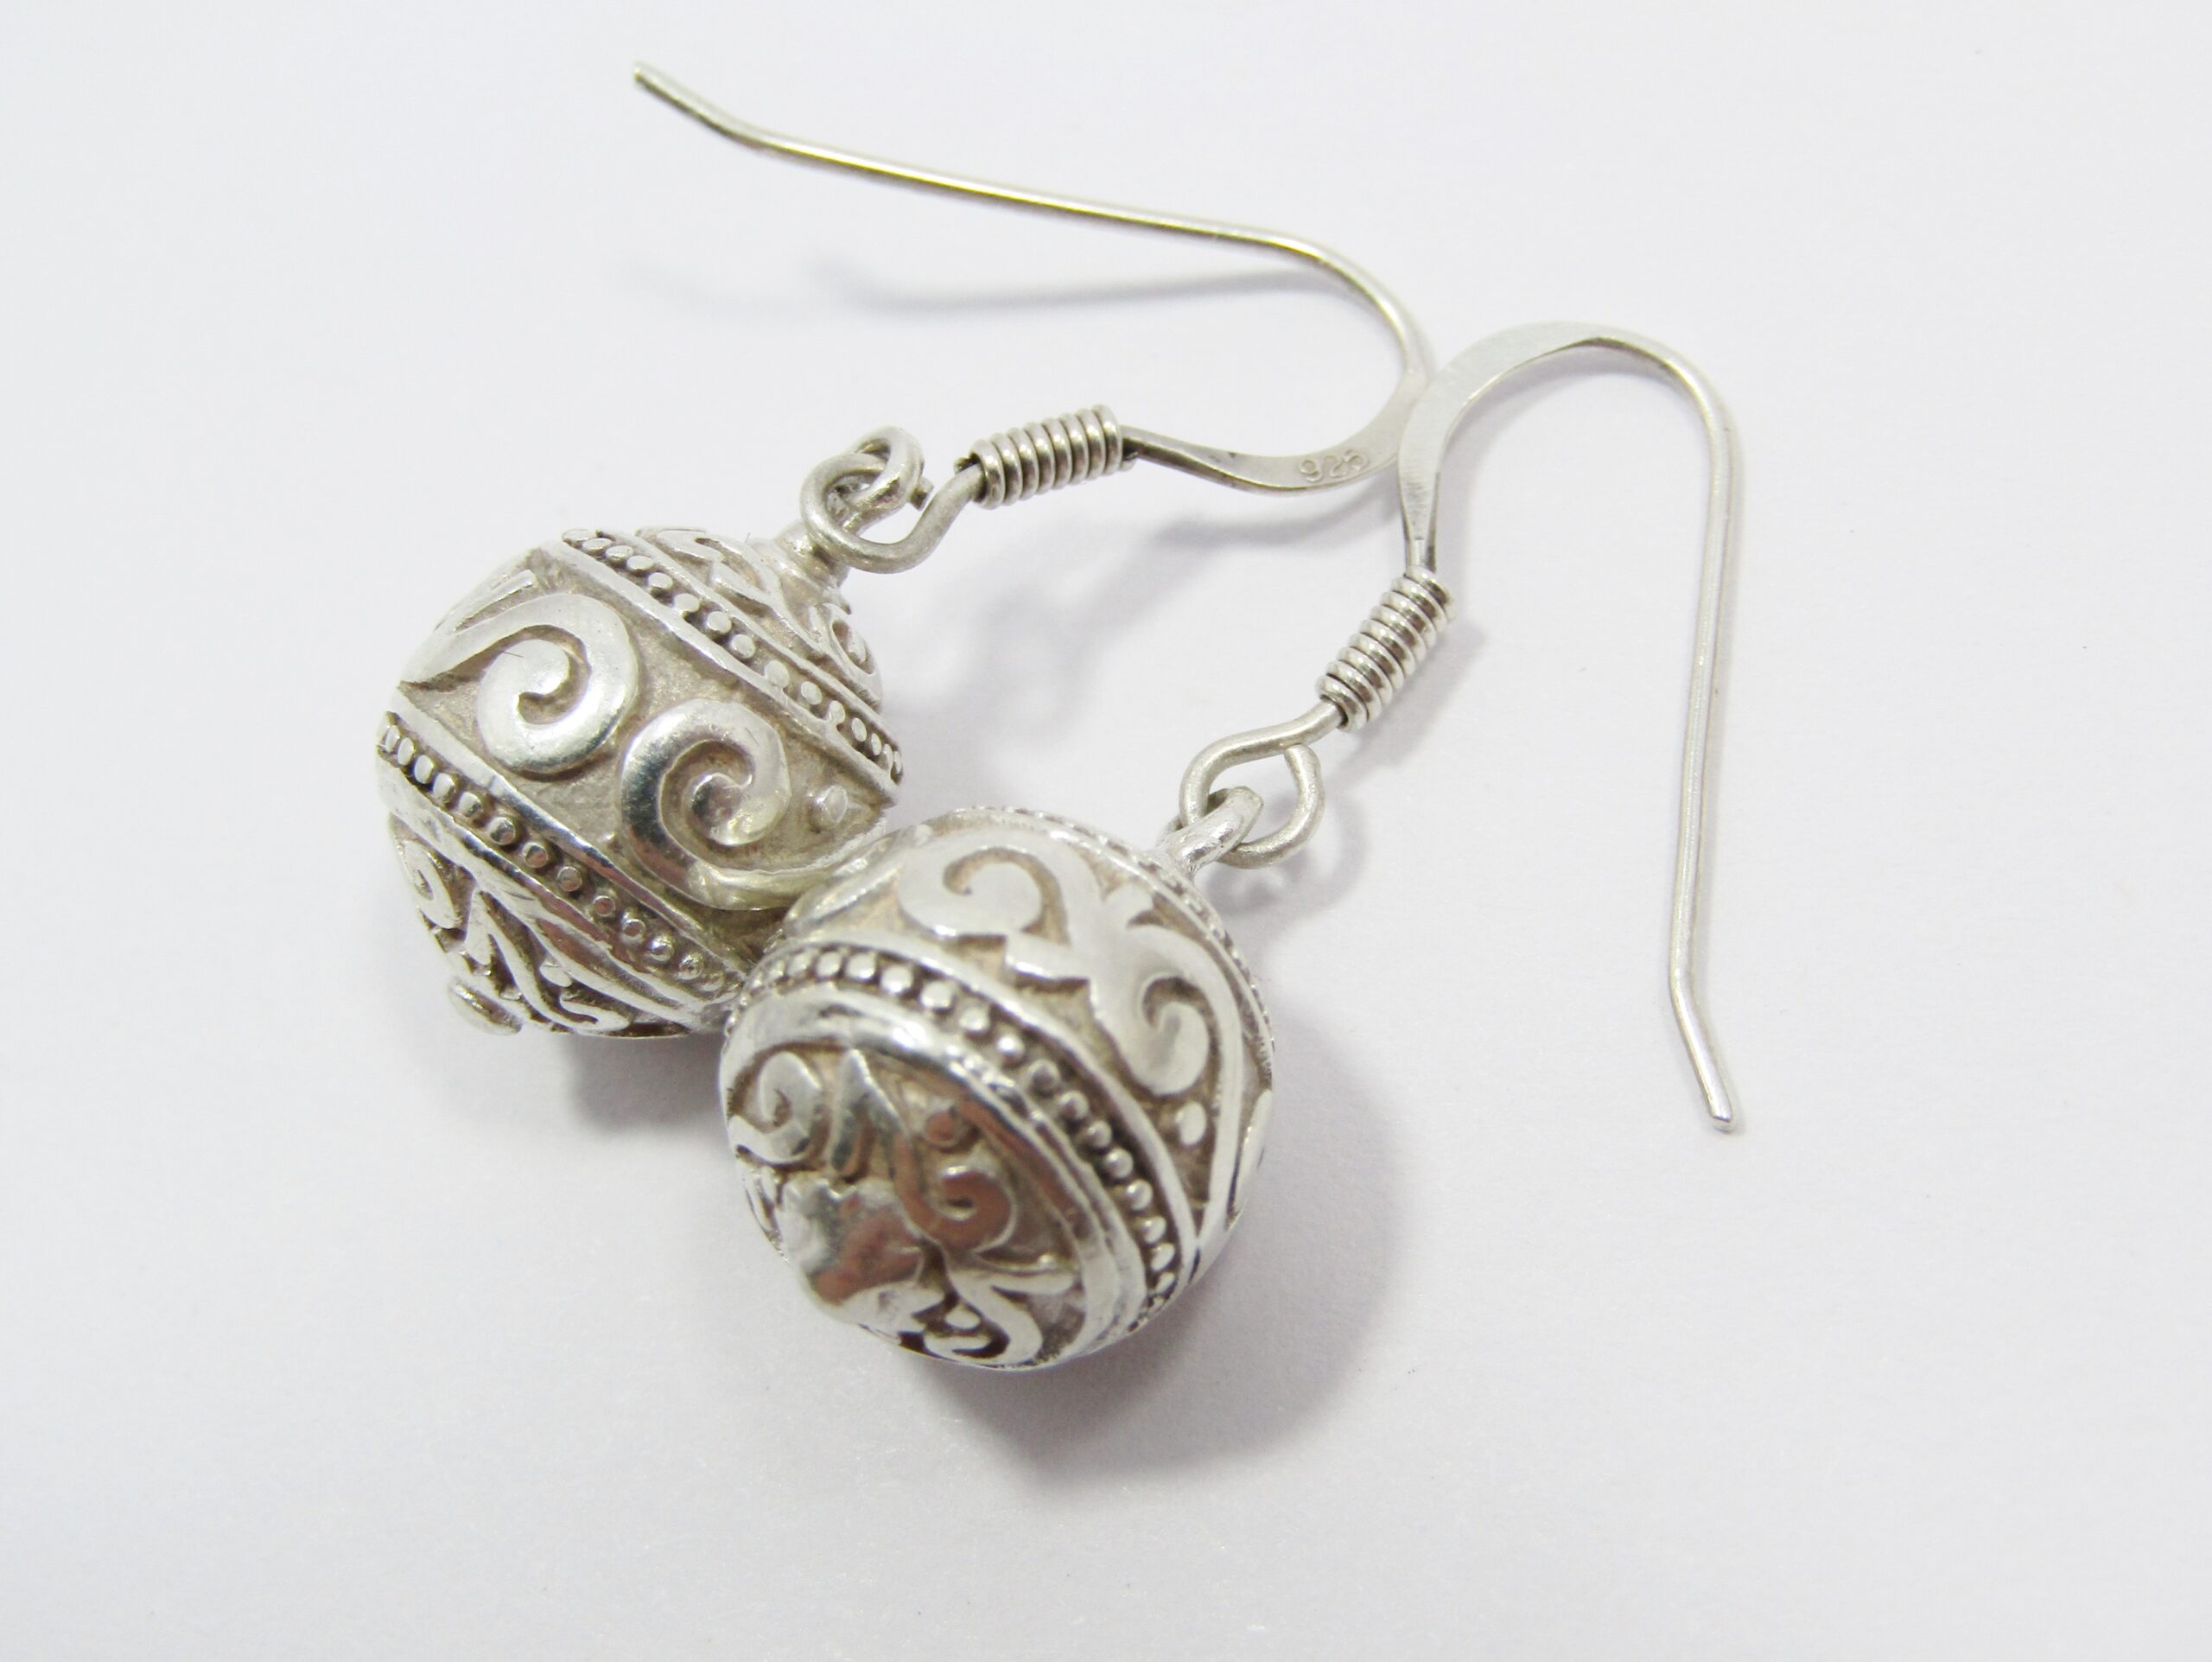 A Gorgeous Pair Repousse Design Ball Design Earrings in Sterling Silver